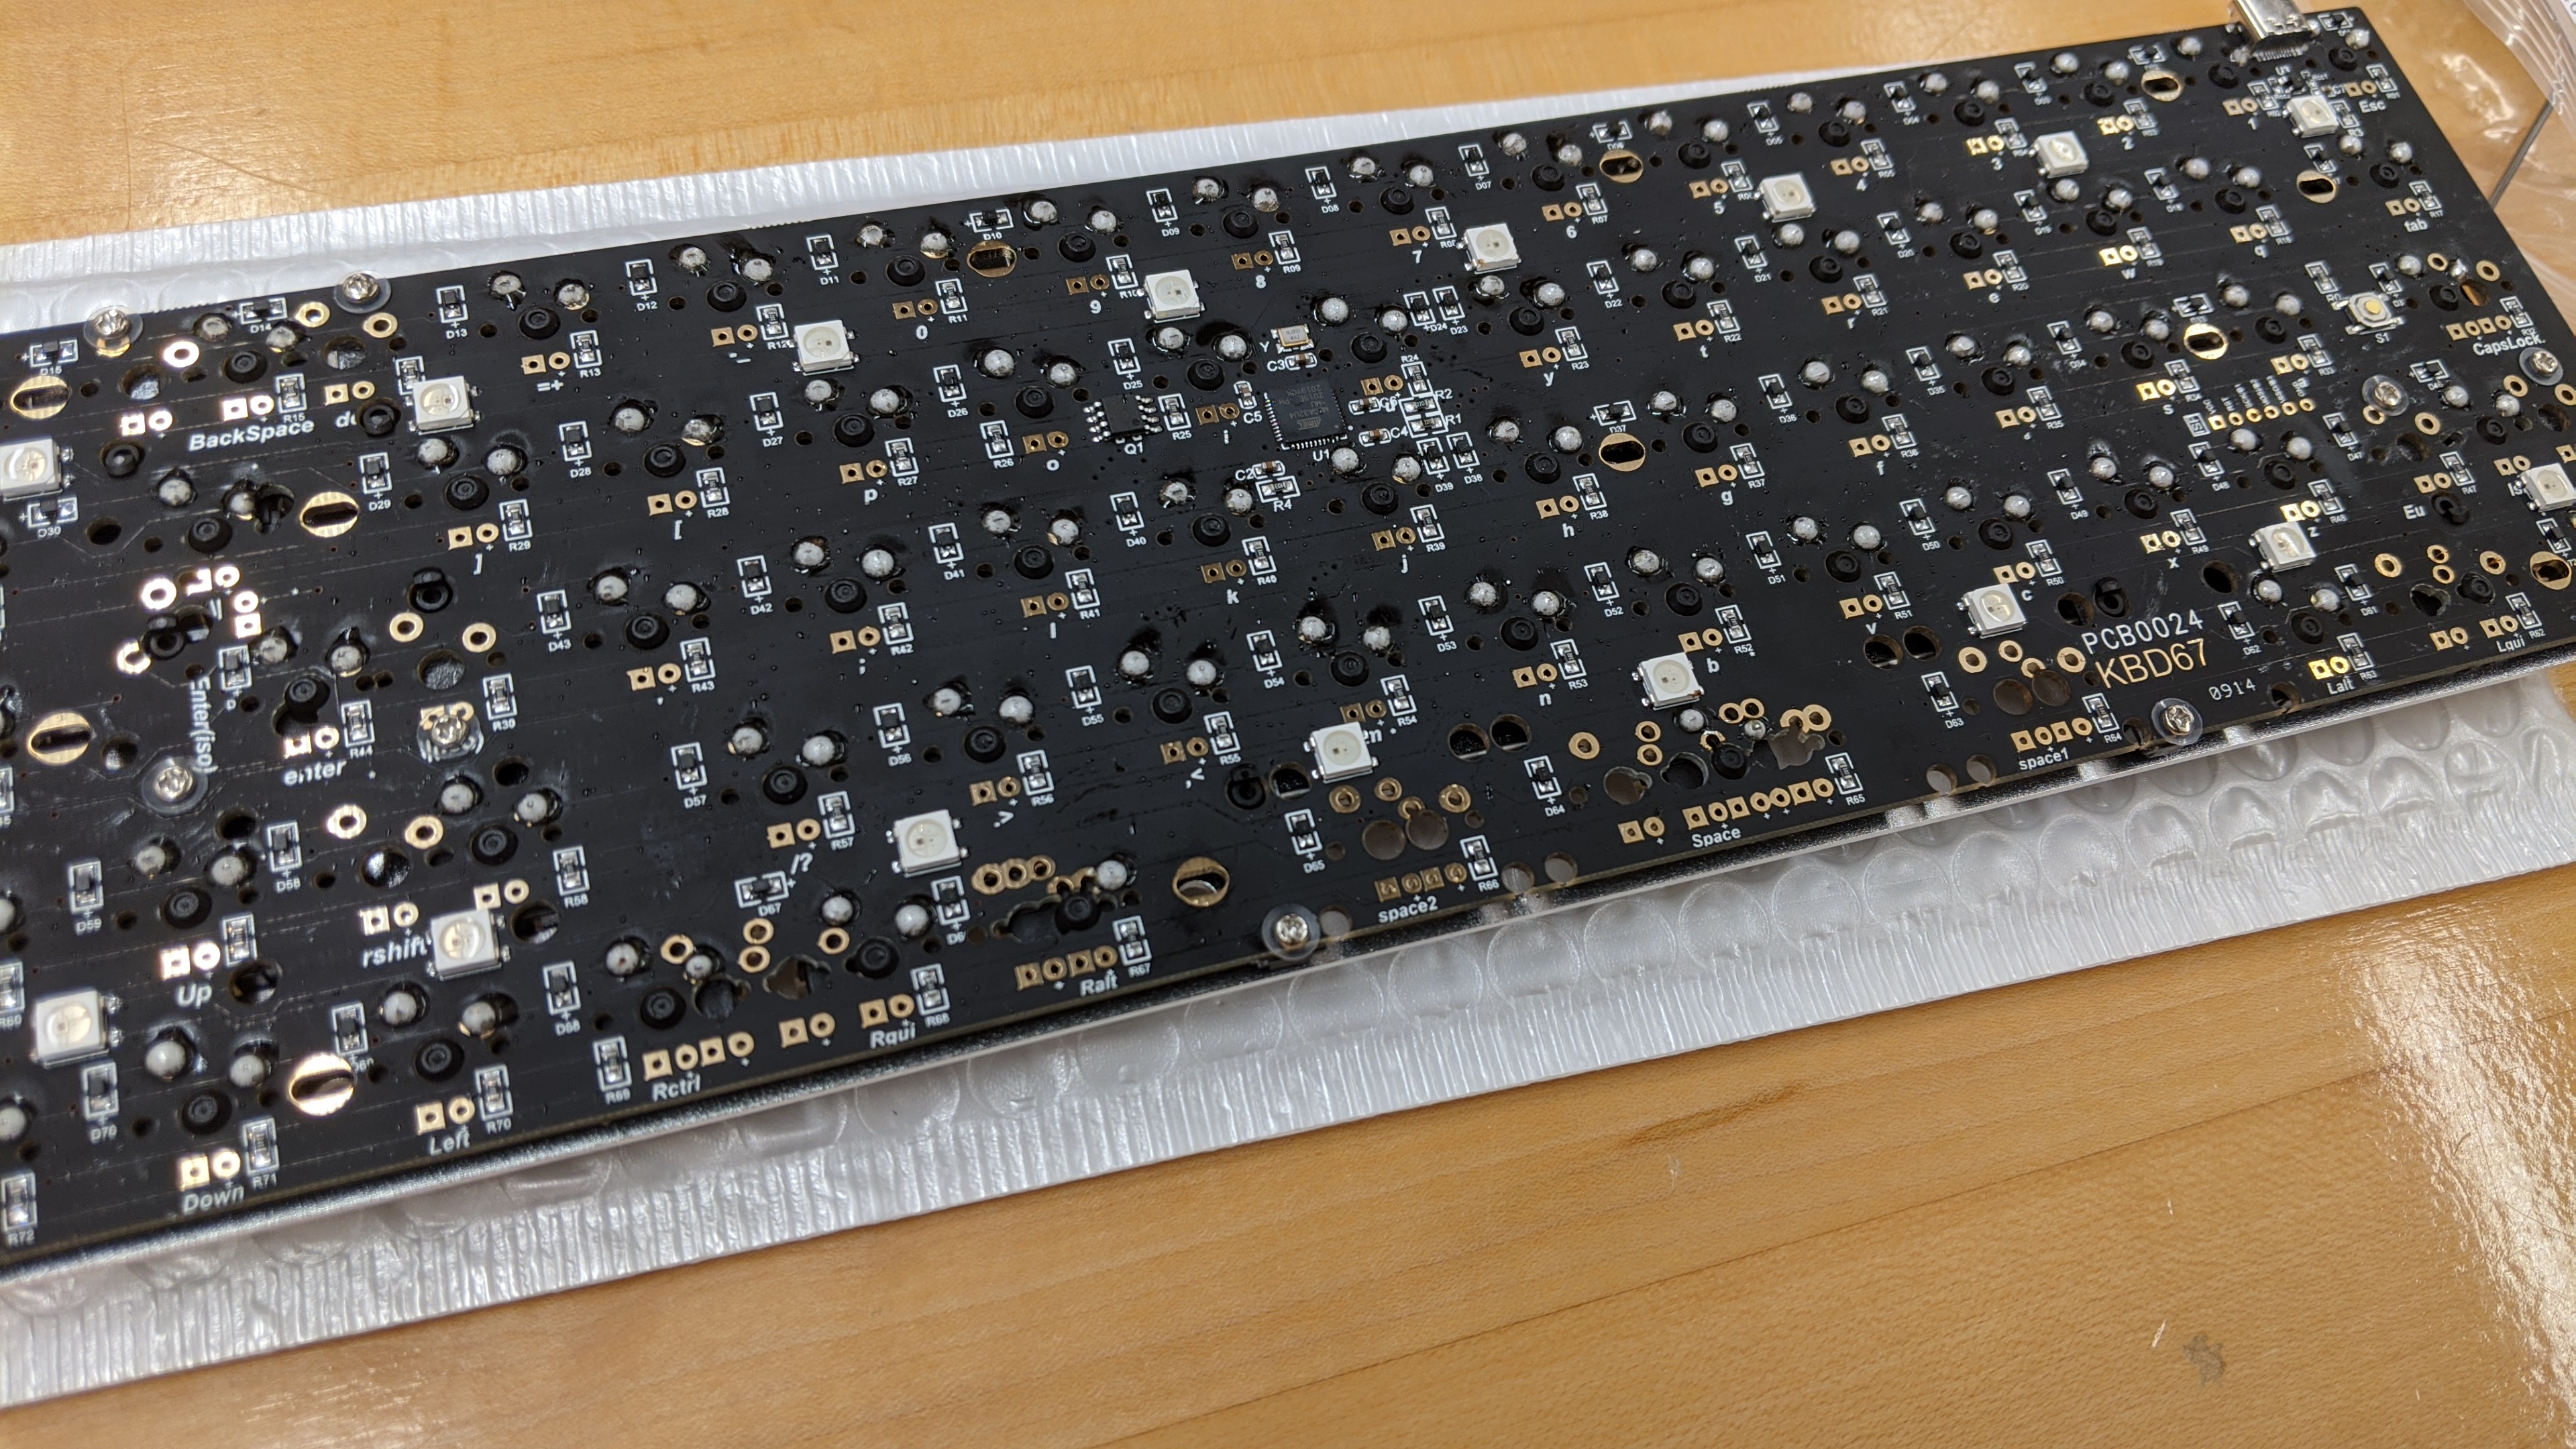 A closeup of the PCB, after all the switches have been soldered into place.